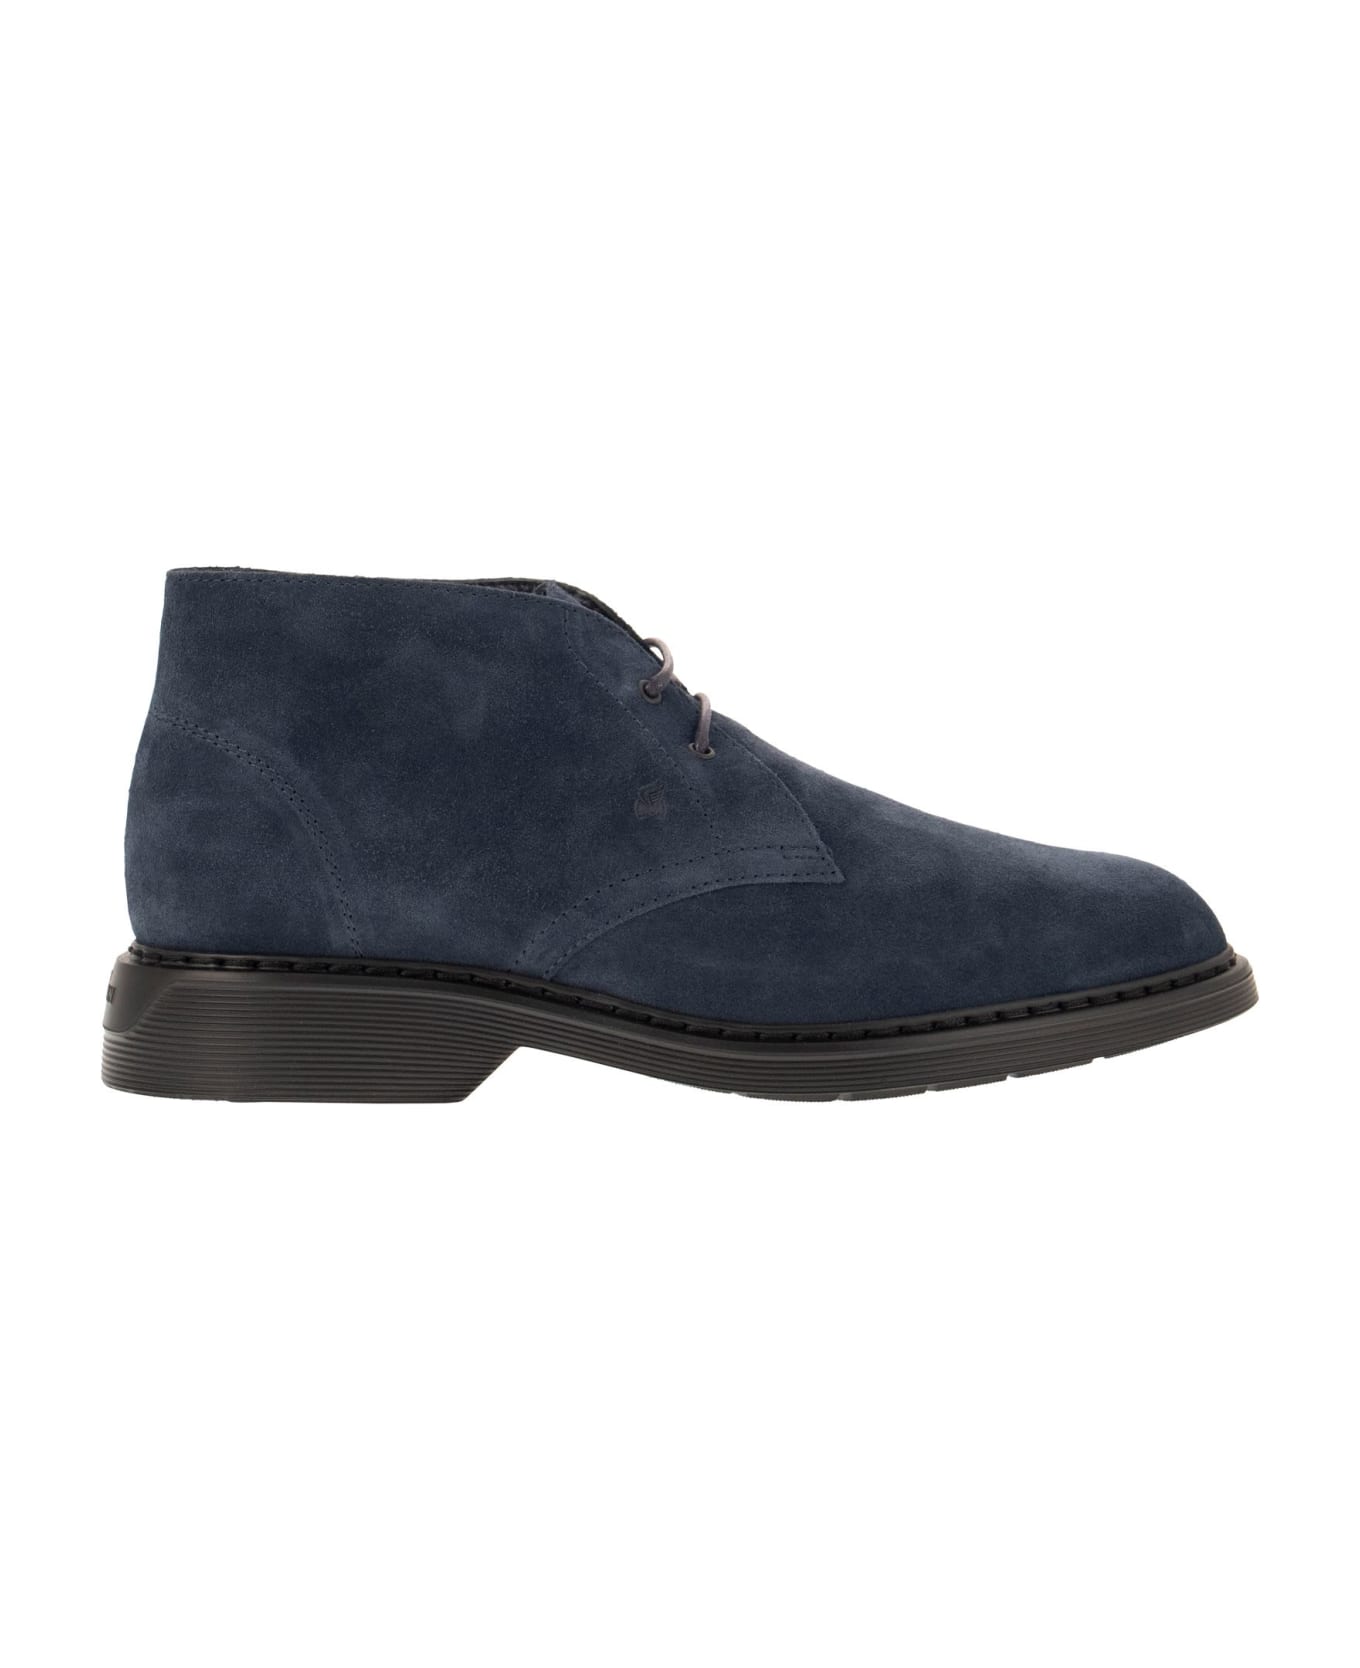 Hogan H576 - Suede Ankle Boots - Navy Blue